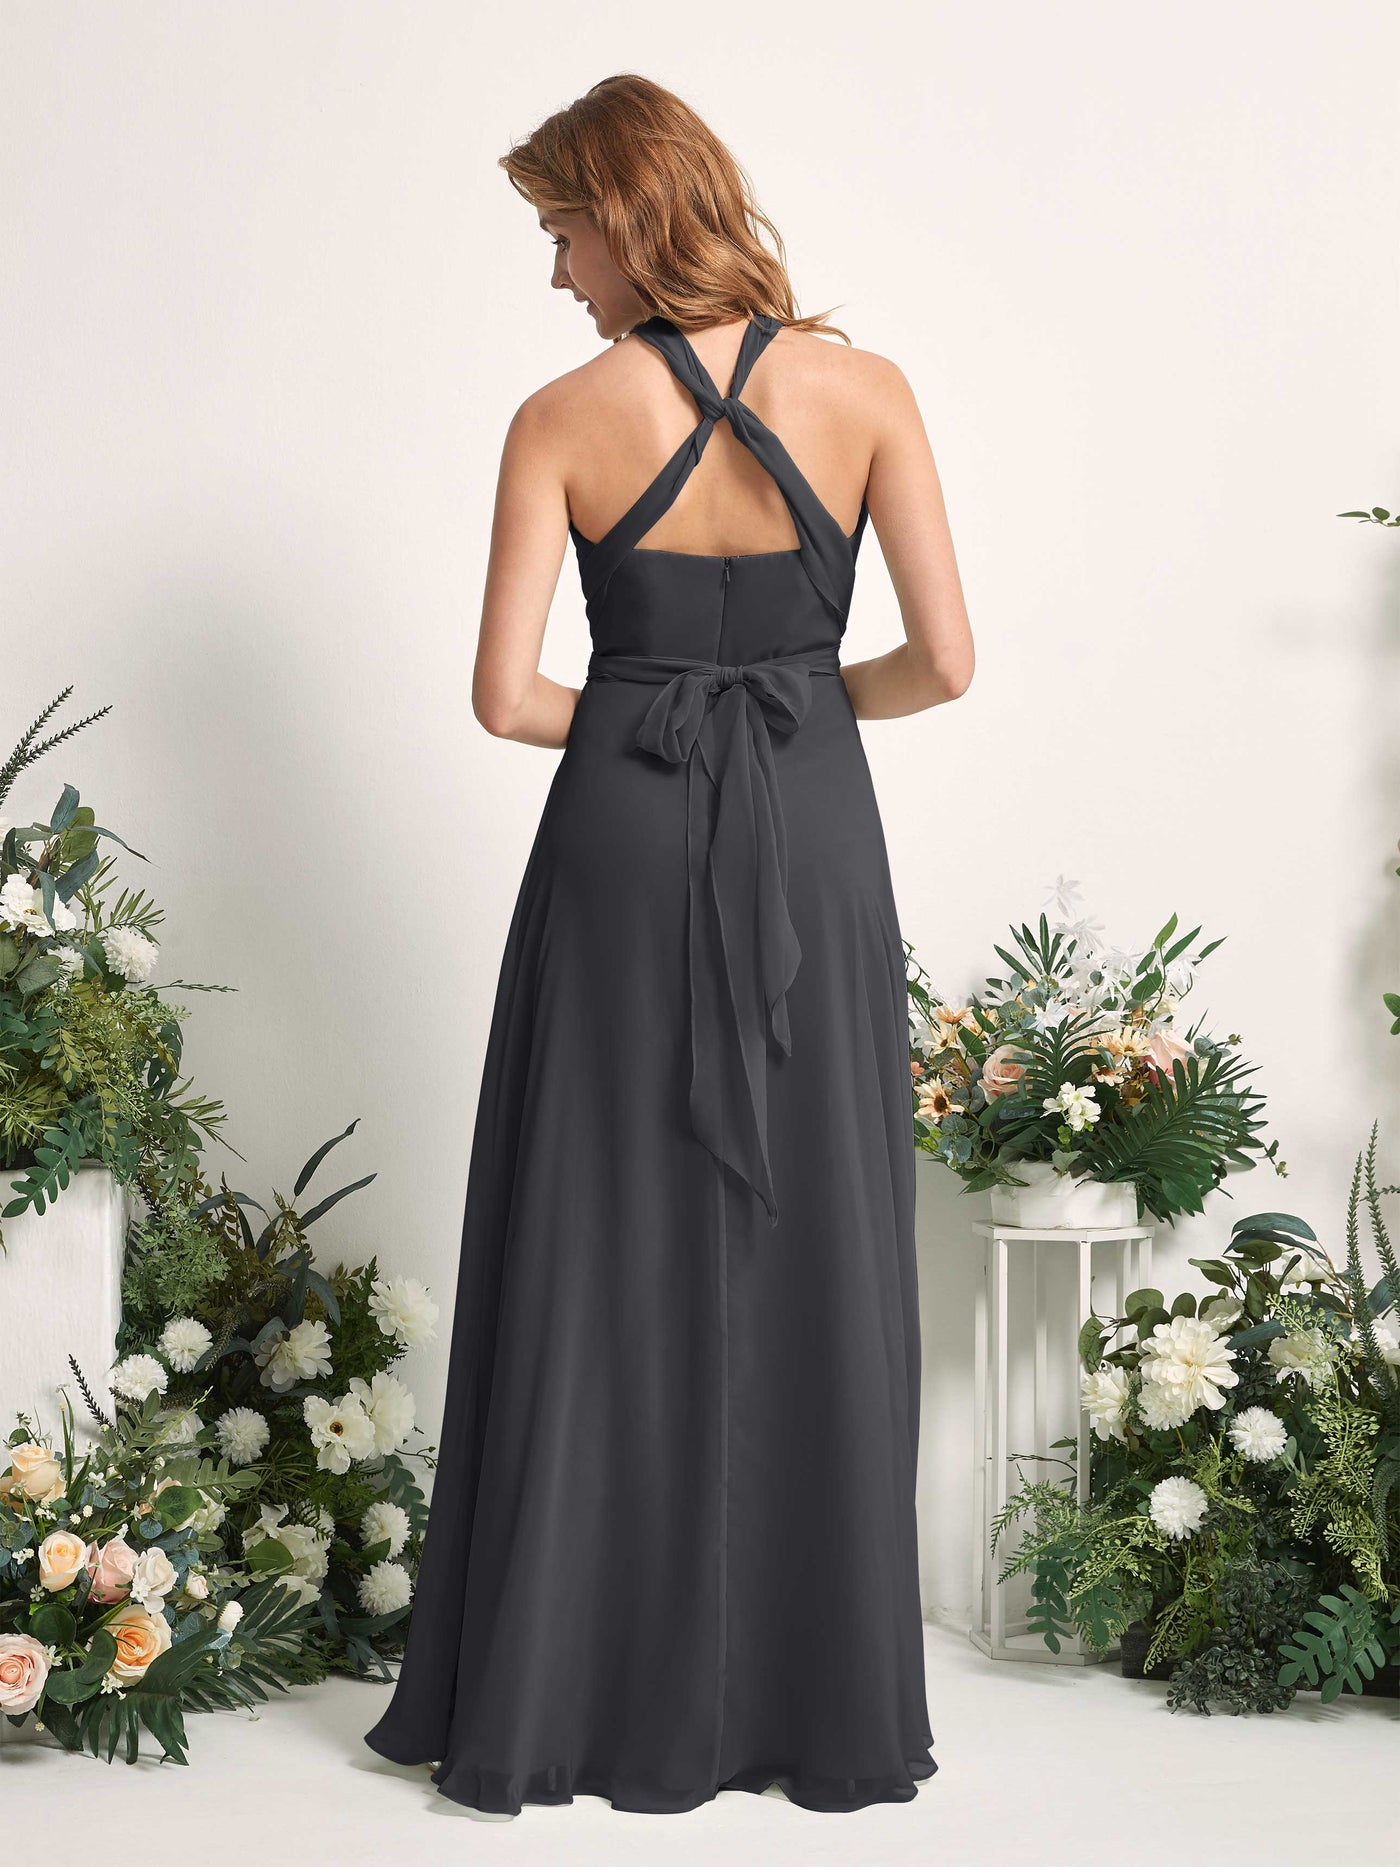 Bridesmaid Dress A-line Chiffon Halter Full Length Short Sleeves Wedding Party Dress - Pewter (81226338)#color_pewter